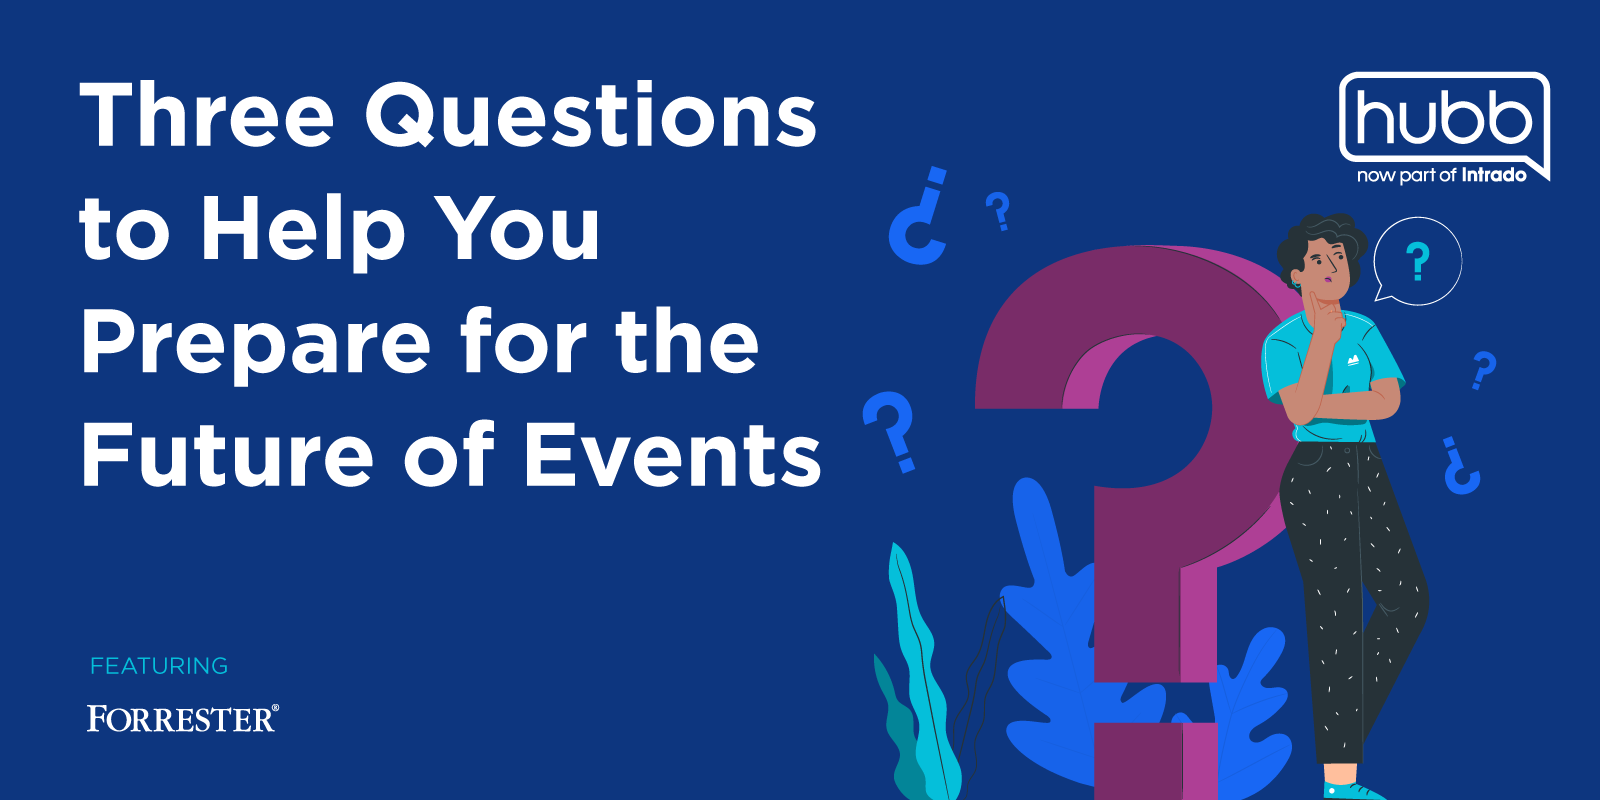 Three questions to help you prepare for the future of events with illustration of woman pondering.